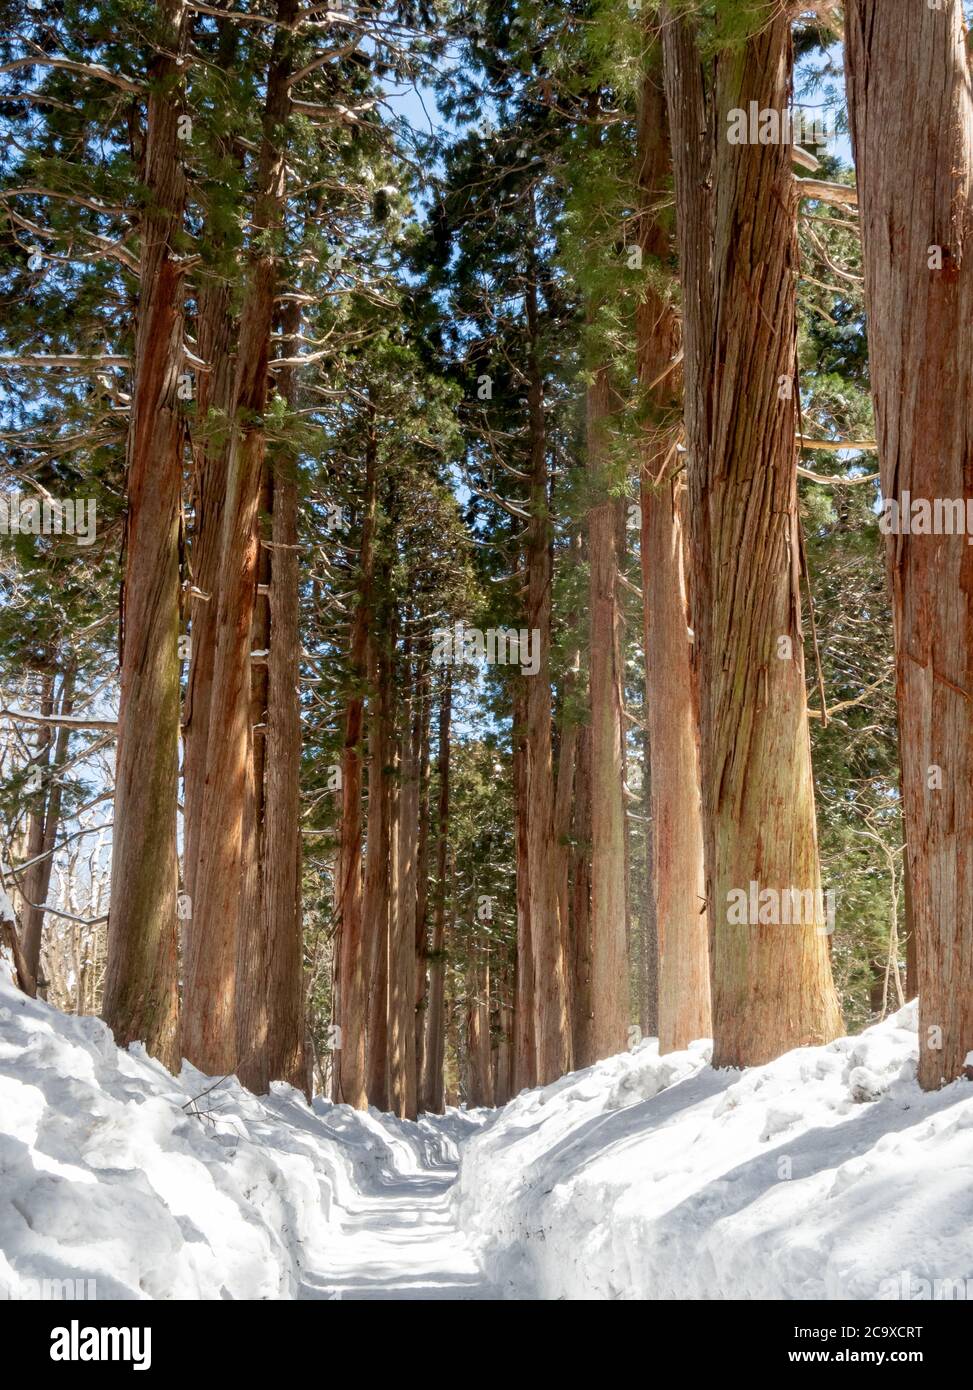 Japanese Cedar Trees, said to be over 400 years old, lining the path to the Upper Togakushi Shrine. Nagano Prefecture, Japan Stock Photo